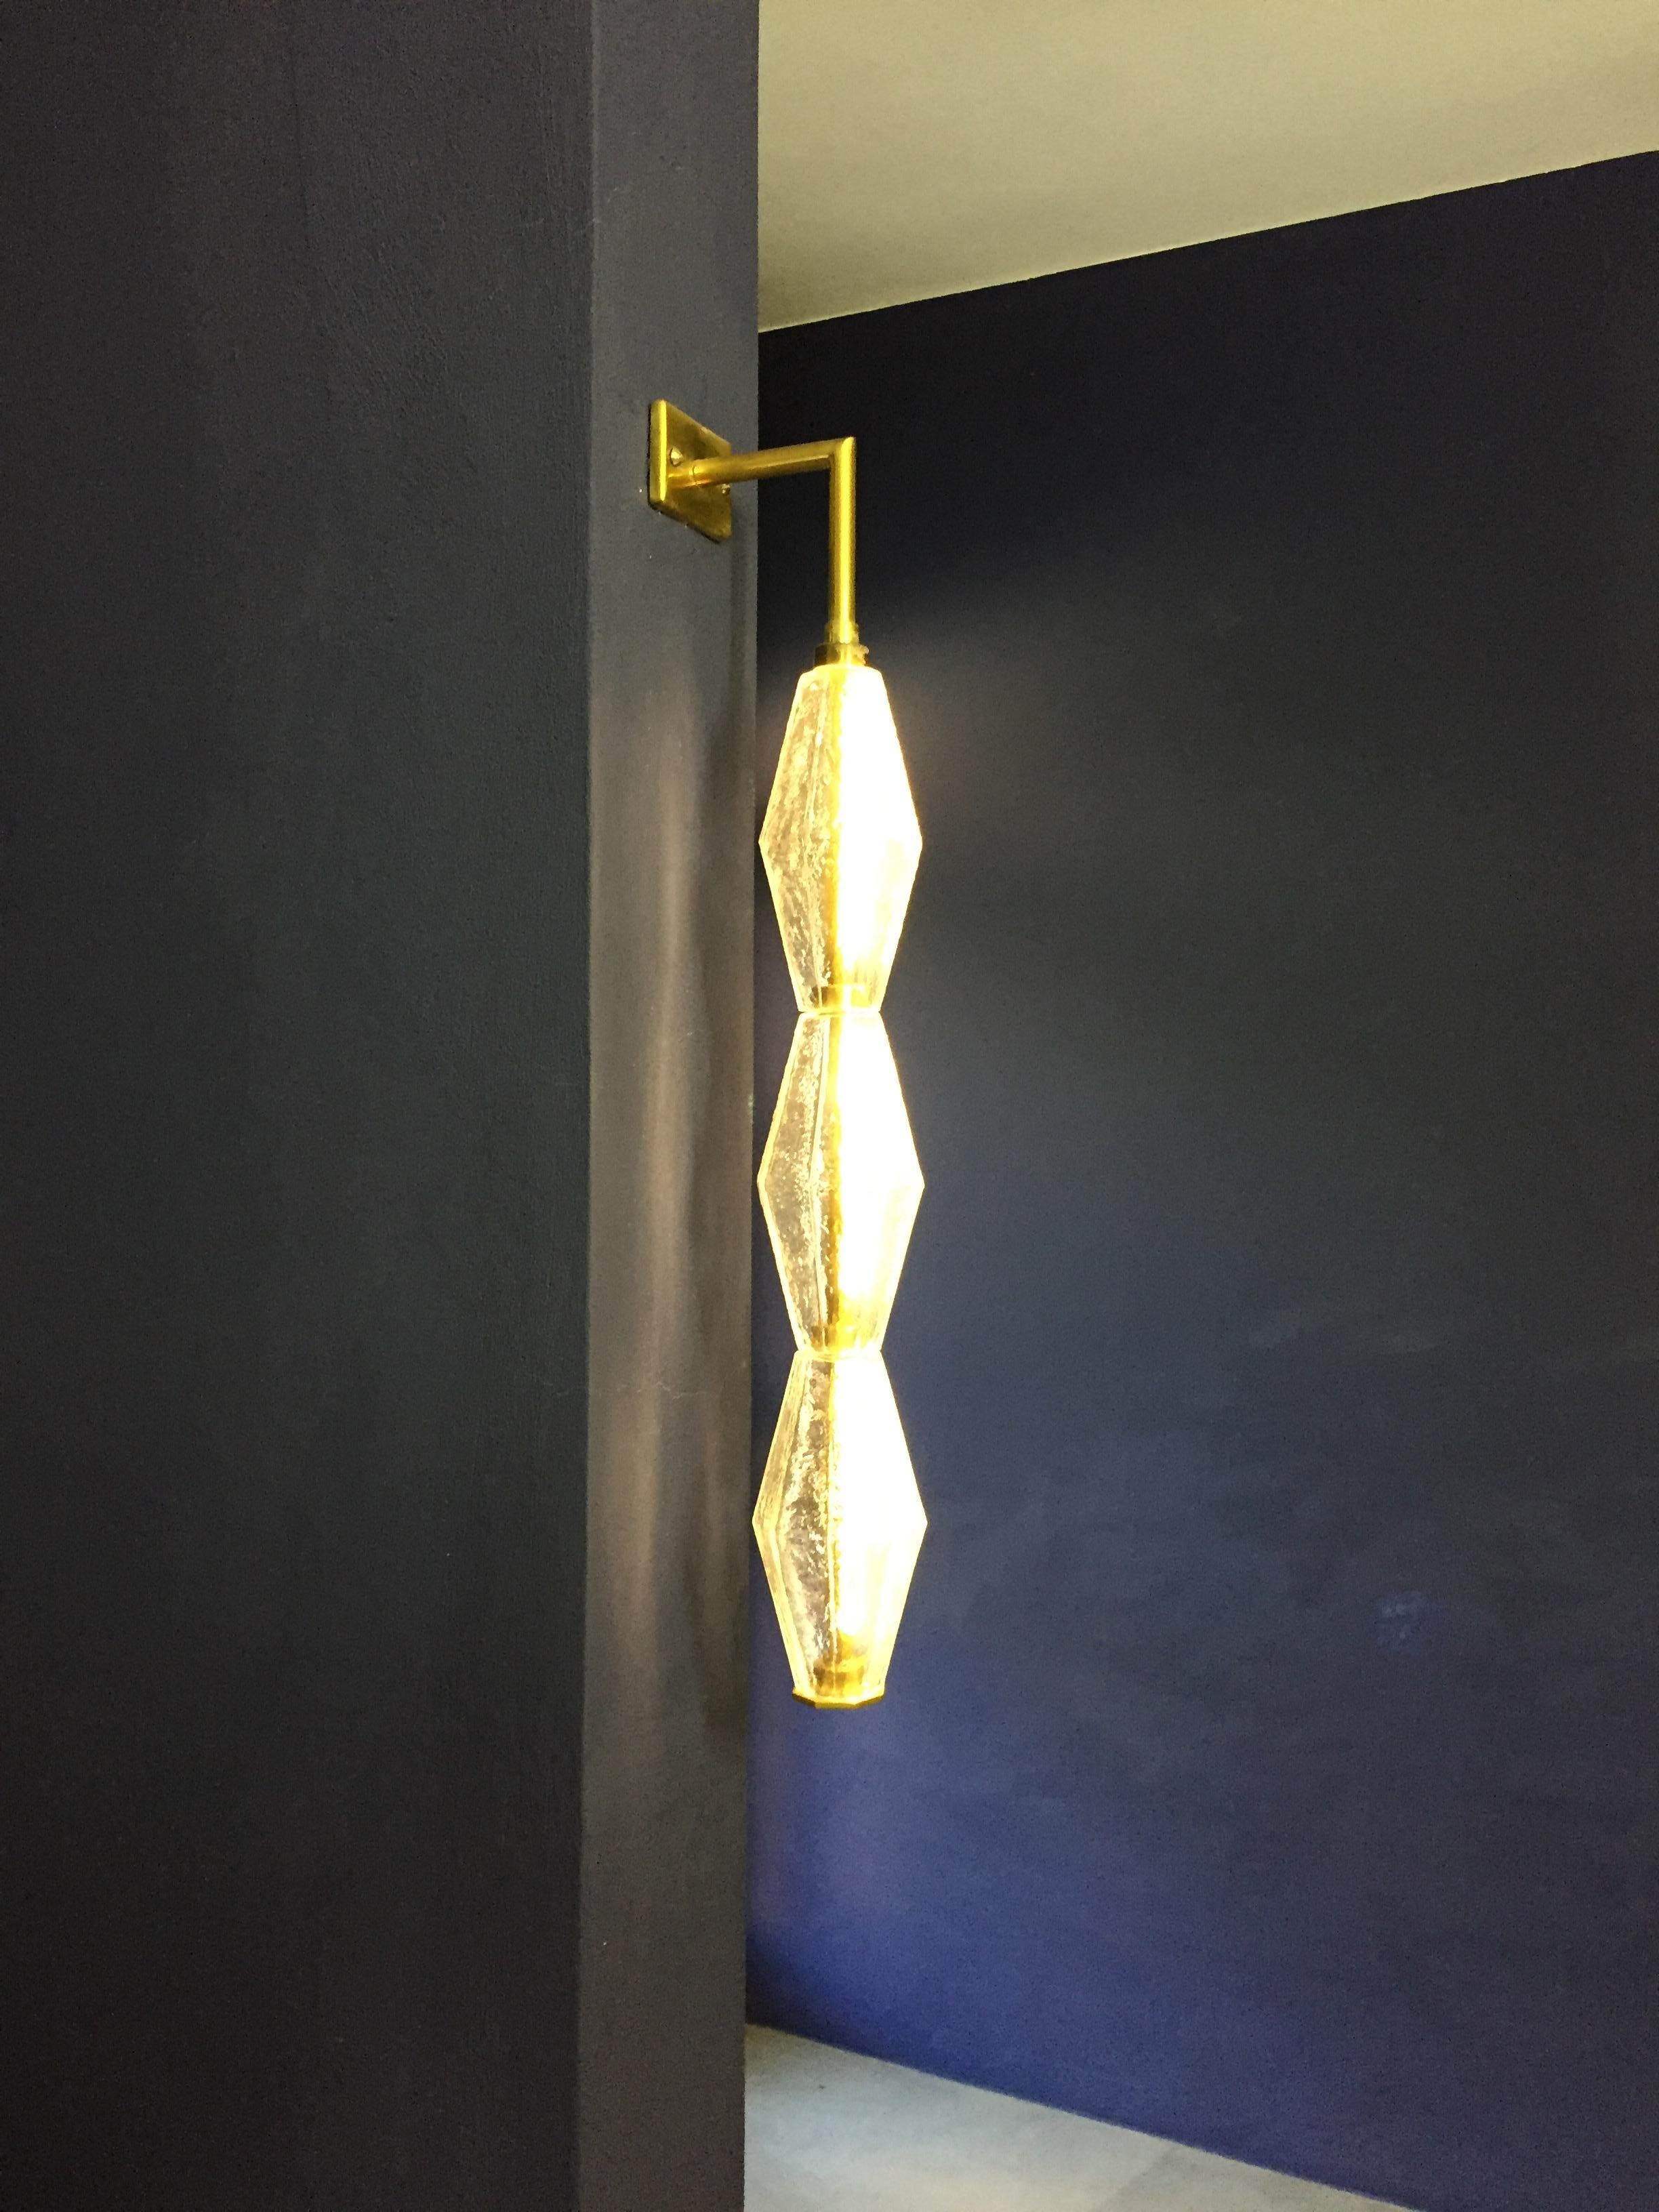 Vintage glass / polished brass

Contemporary wall lamp made with vintage Carlo Scarpa poliedri, assembled in a vertical line on a brass tube carved with led light inside. The particular glass used, gives to this lamp a neo-vintage appeal.